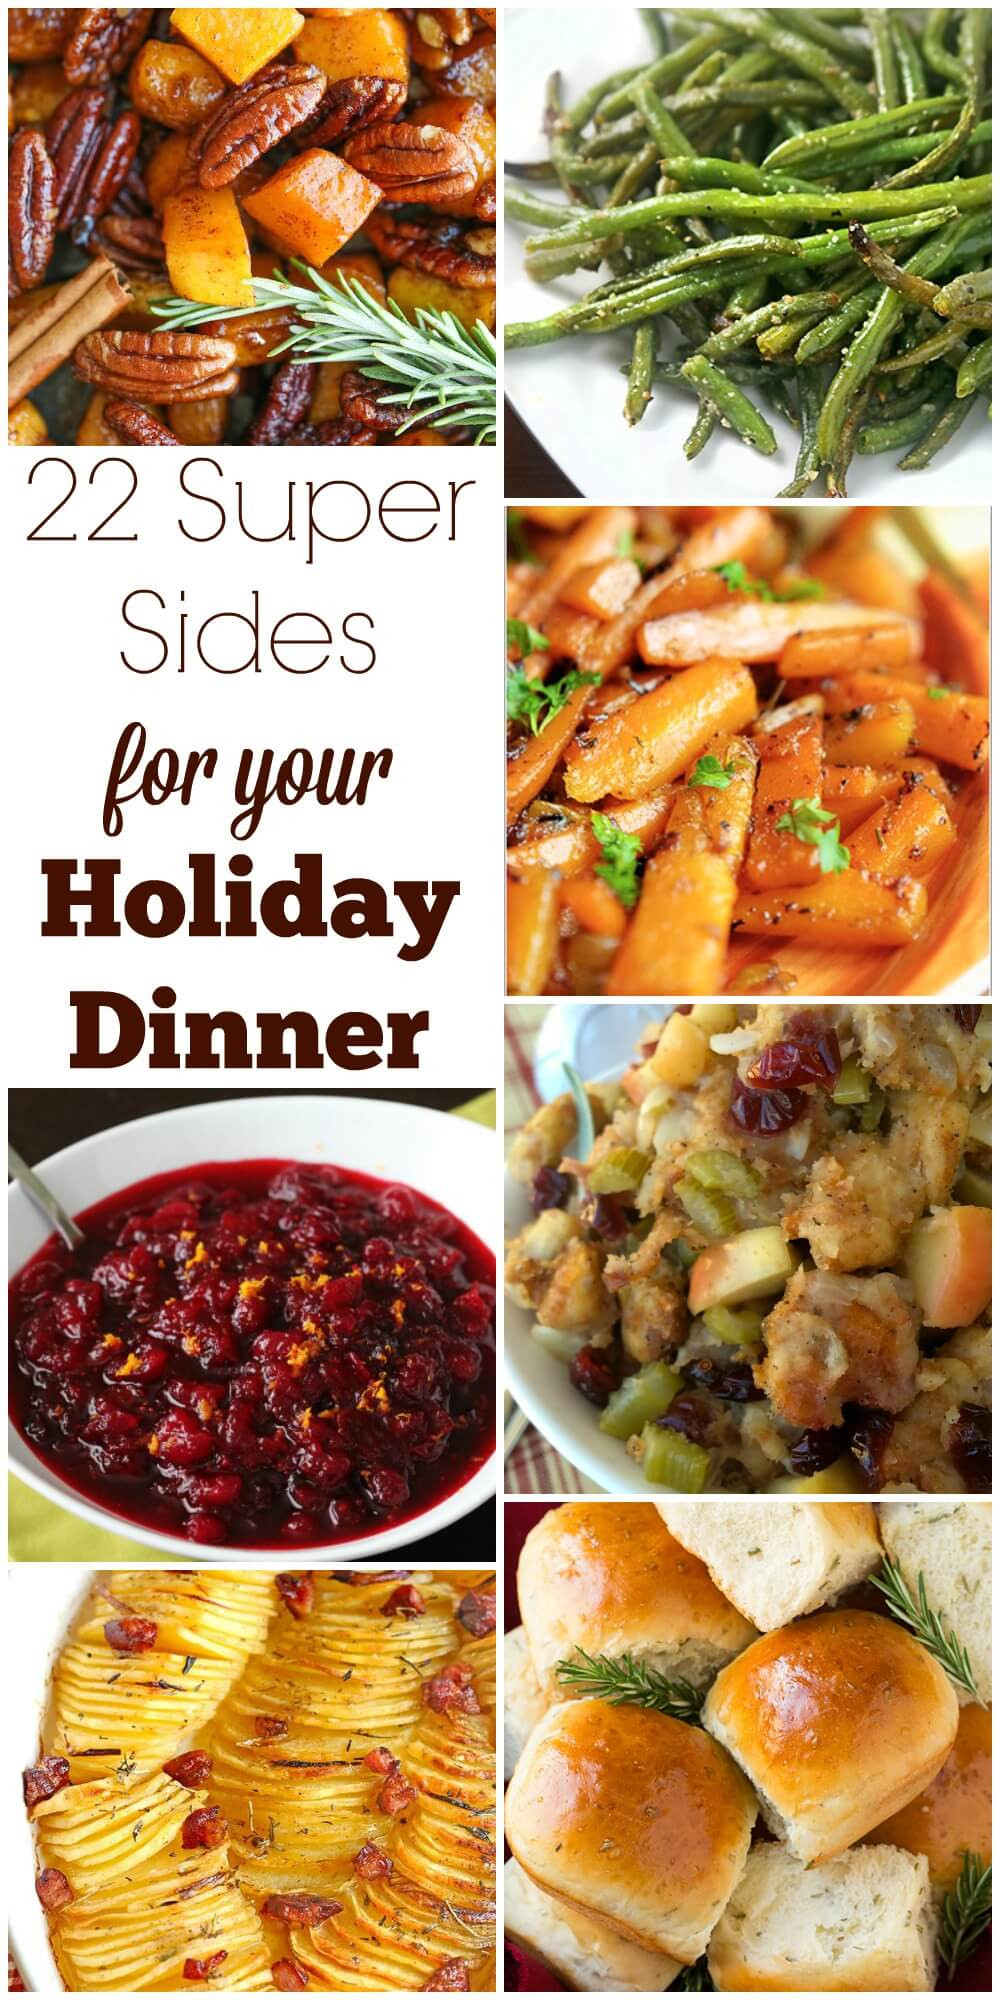 Food For Christmas Dinner
 22 Super Sides for Your Holiday Dinner